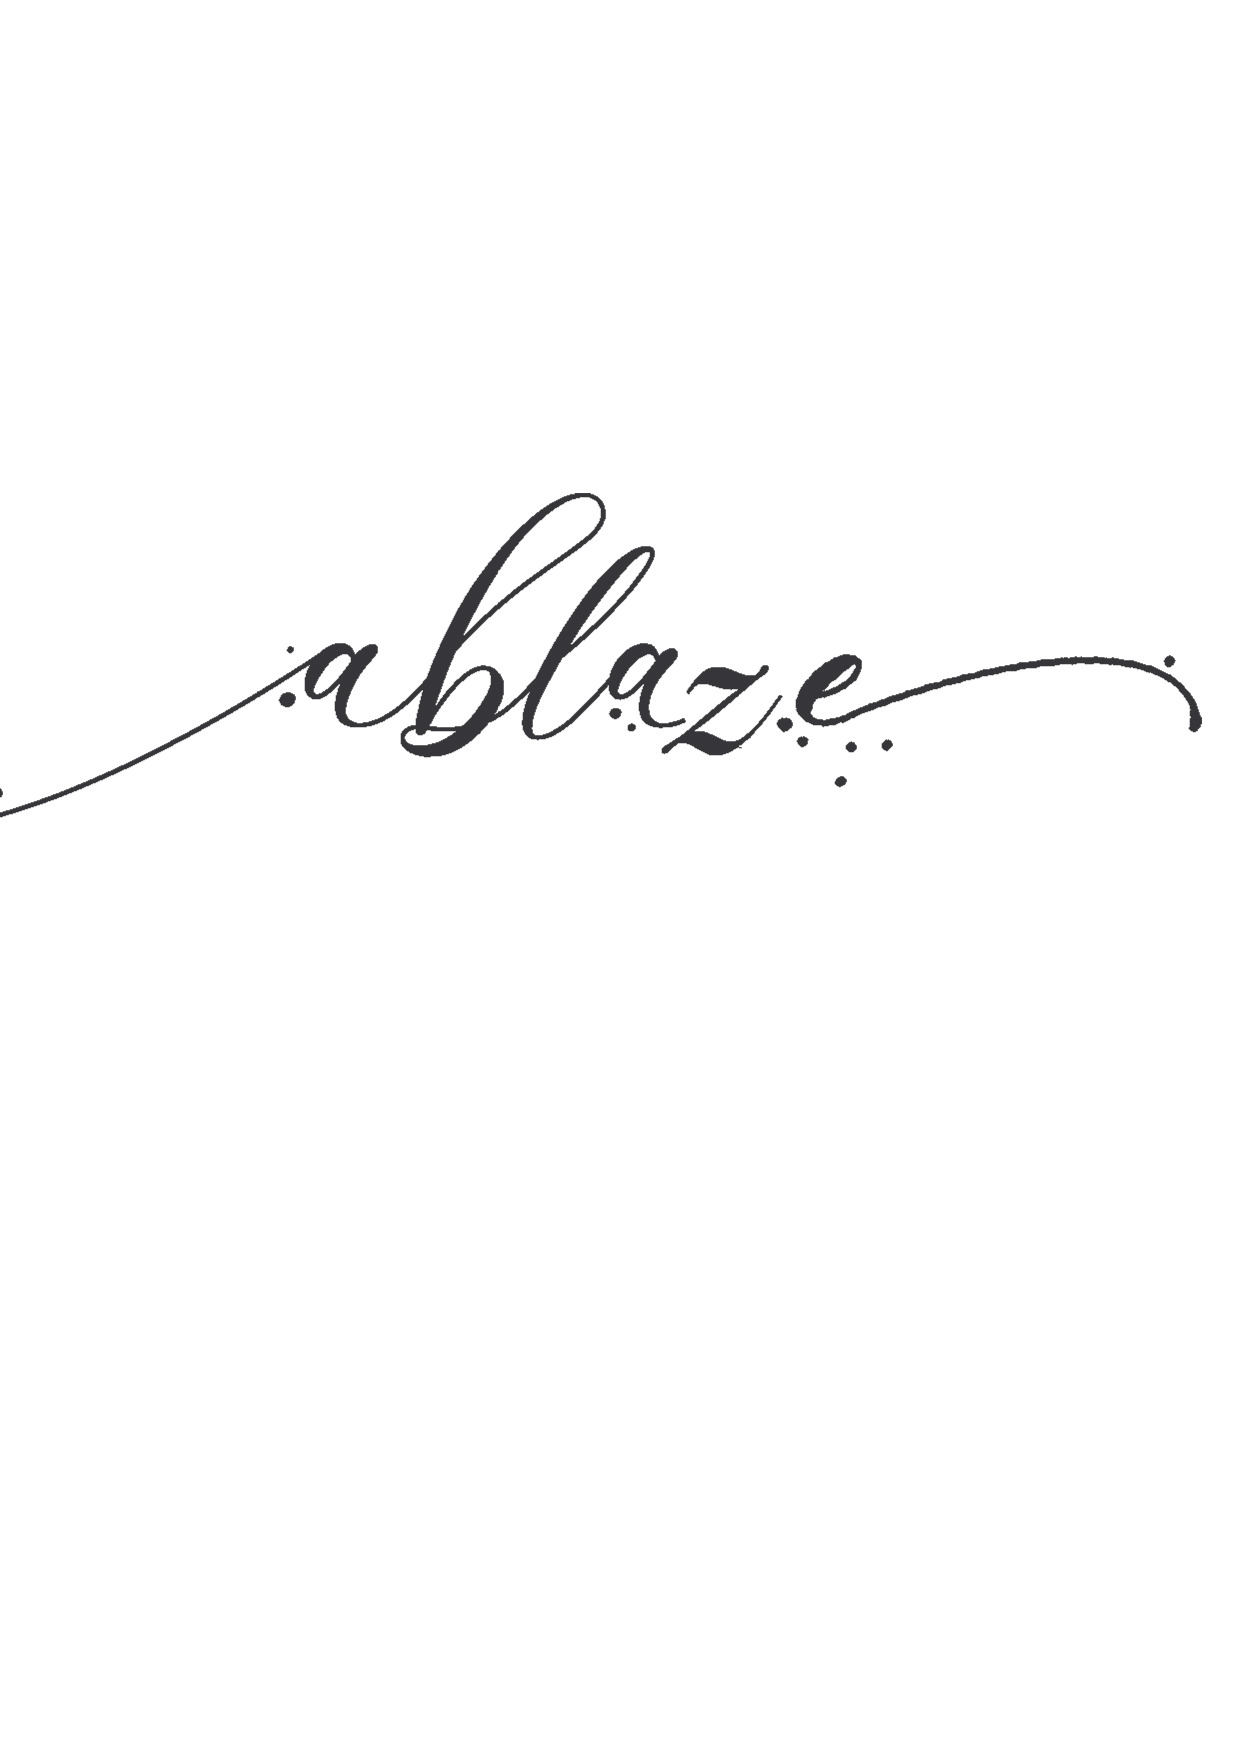 Please what font for ablaze